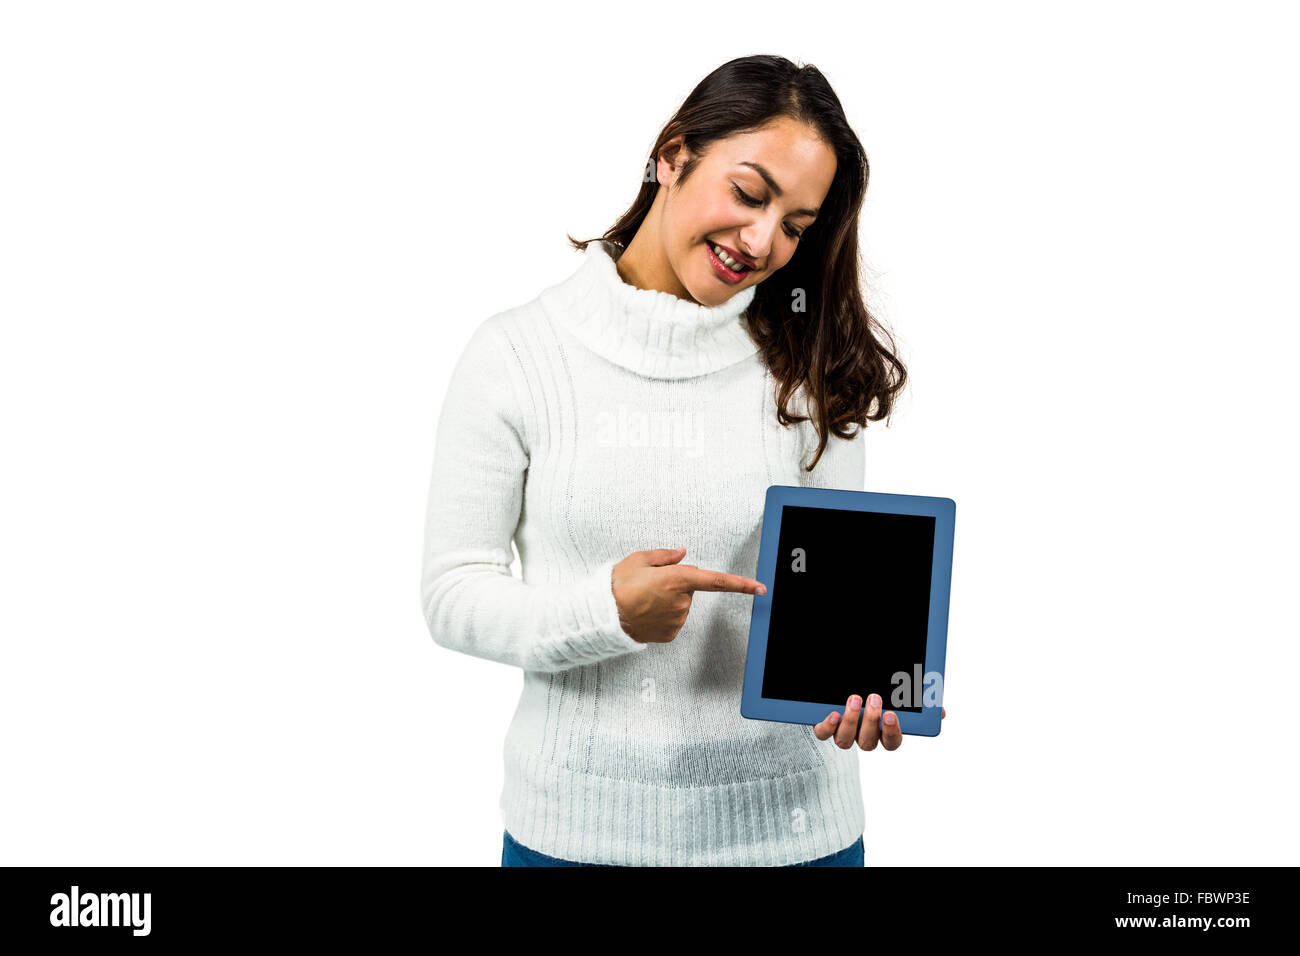 Happy young woman pointing at digital tablet Stock Photo